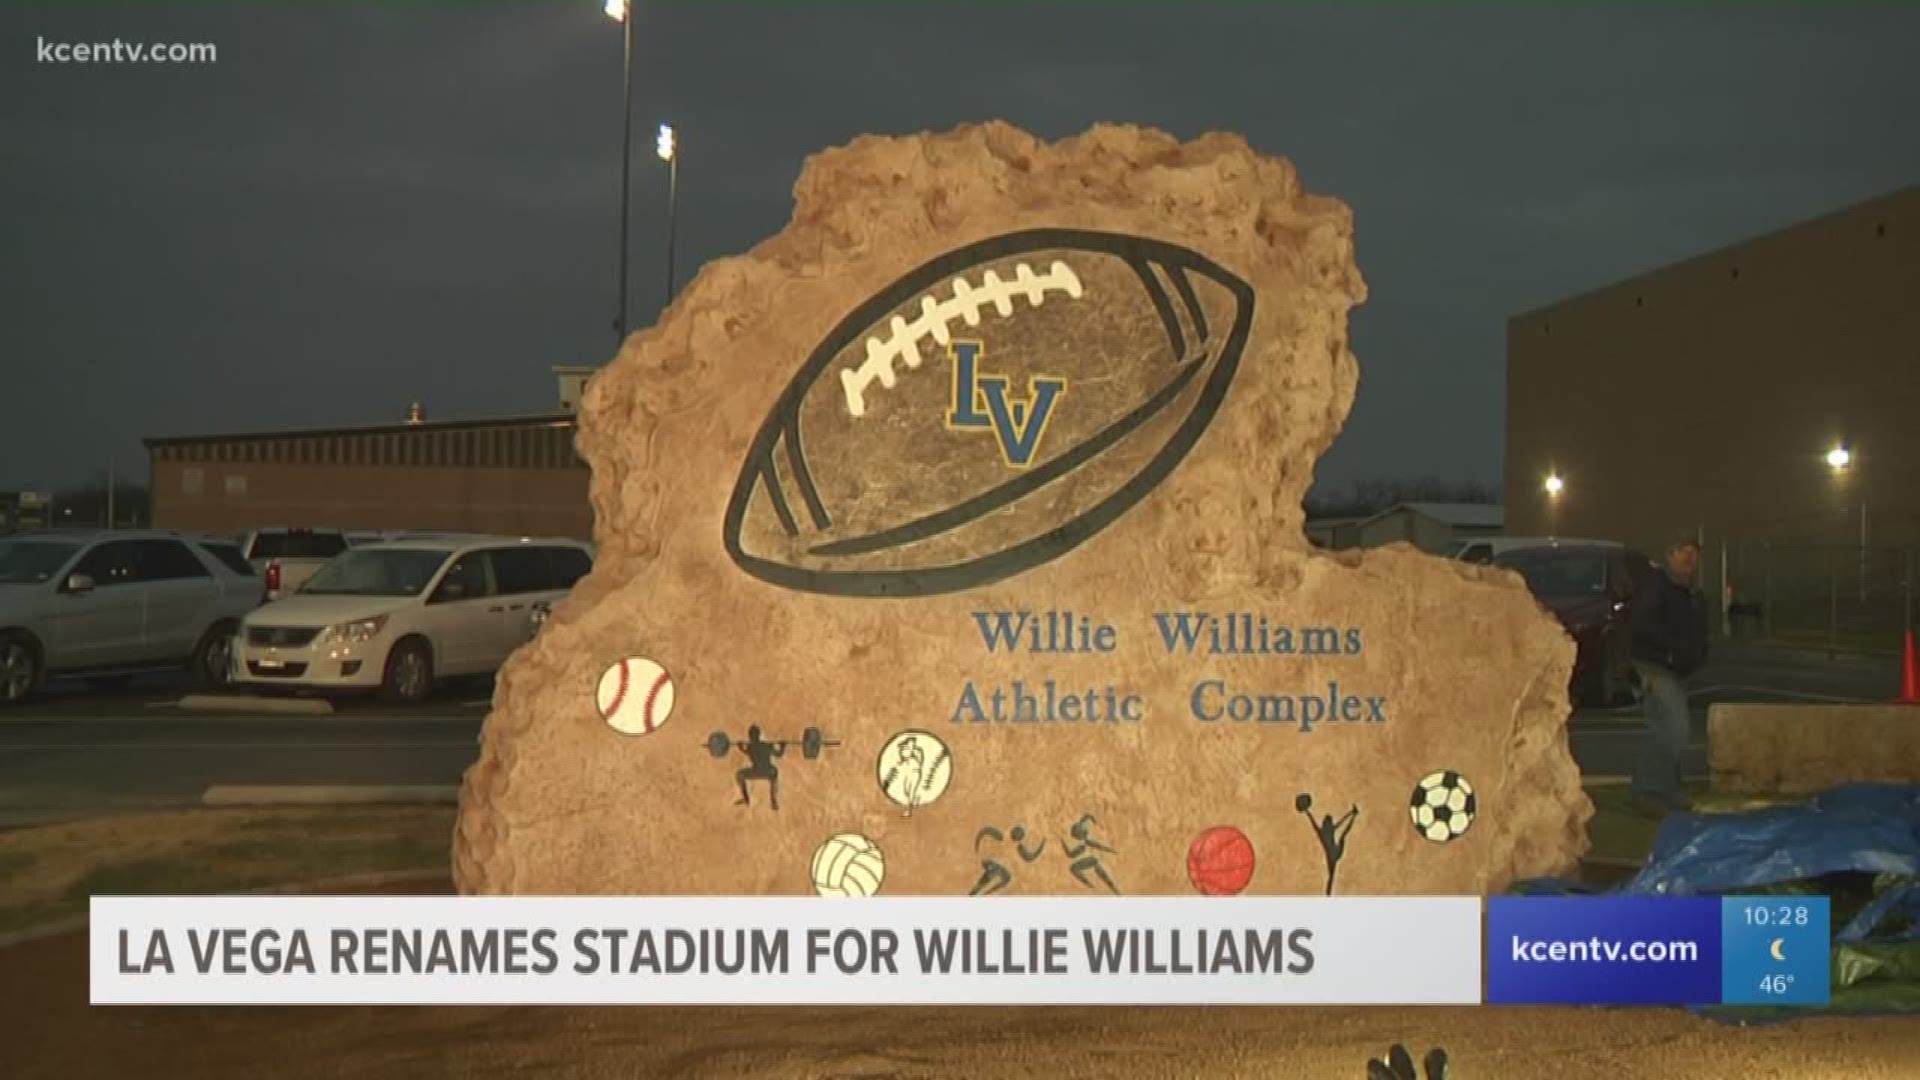 Willie Williams was La Vega's head football coach for nearly 30 years, and he transformed the program into a powerhouse. On Tuesday, the school's football stadium was named after him.